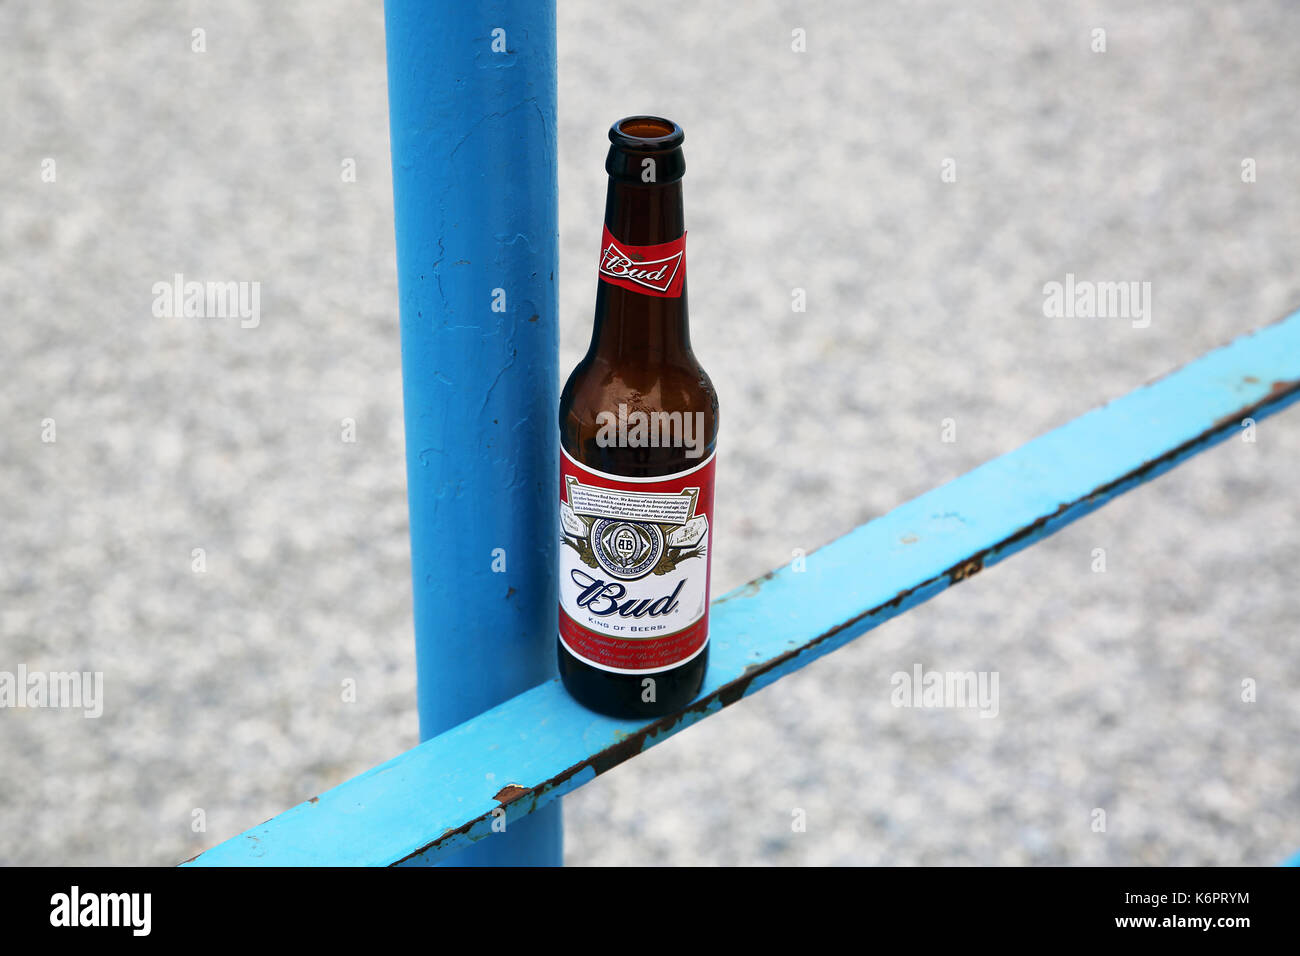 Menton, France - May 14, 2016: Bottle of Budweiser Beer on a Blue Metal Fence, Beach in the Background Stock Photo